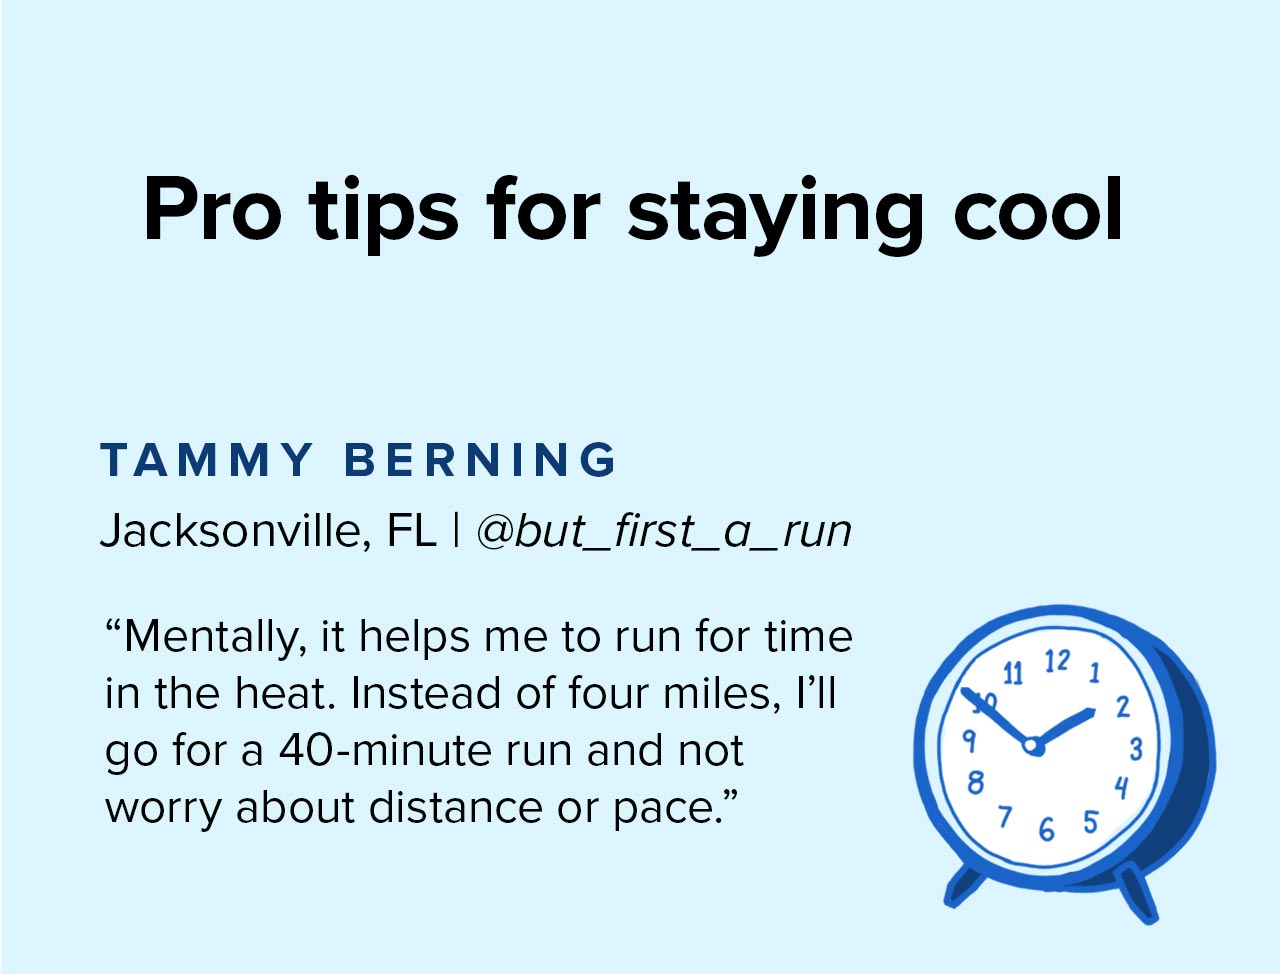 Pro tips for staying cool. | Mentally, it helps me to run for time in heat. Instead of four miles, I''ll go for a 40-minute run and not worry about distance or pace.